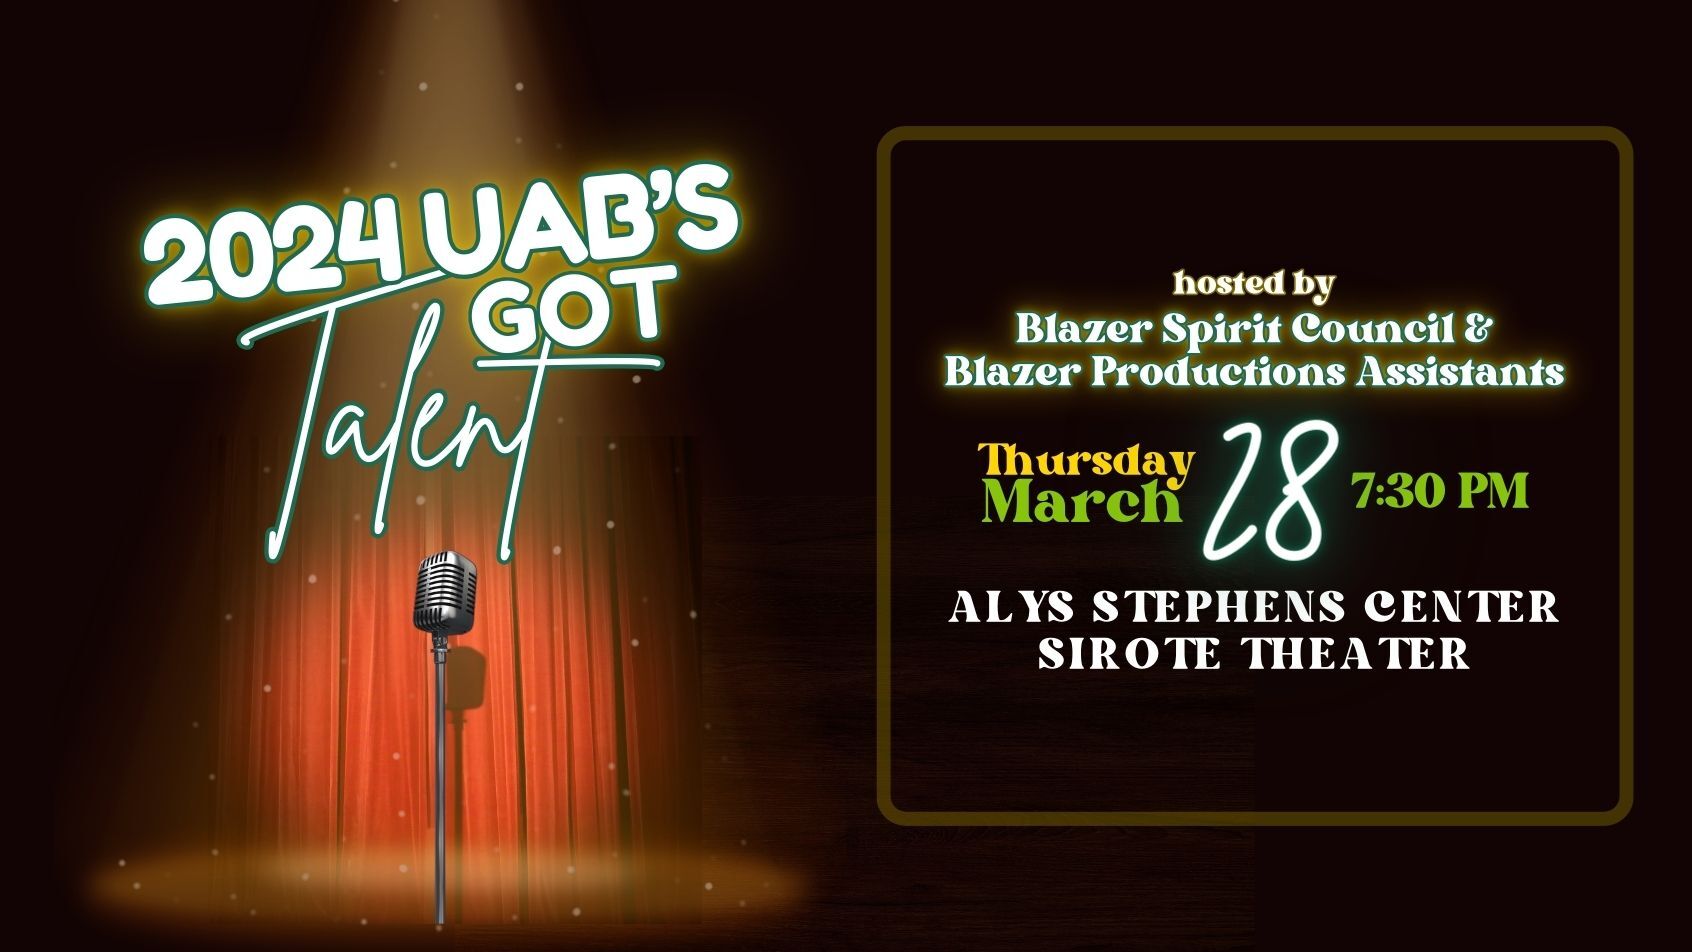 2024 UAB's Got Talent: hosted by Blazer Spirit Council and Blazer Productions Assistants; Thursday March 28, 7:30pm; Alys Stephens Center Sirote Theater.